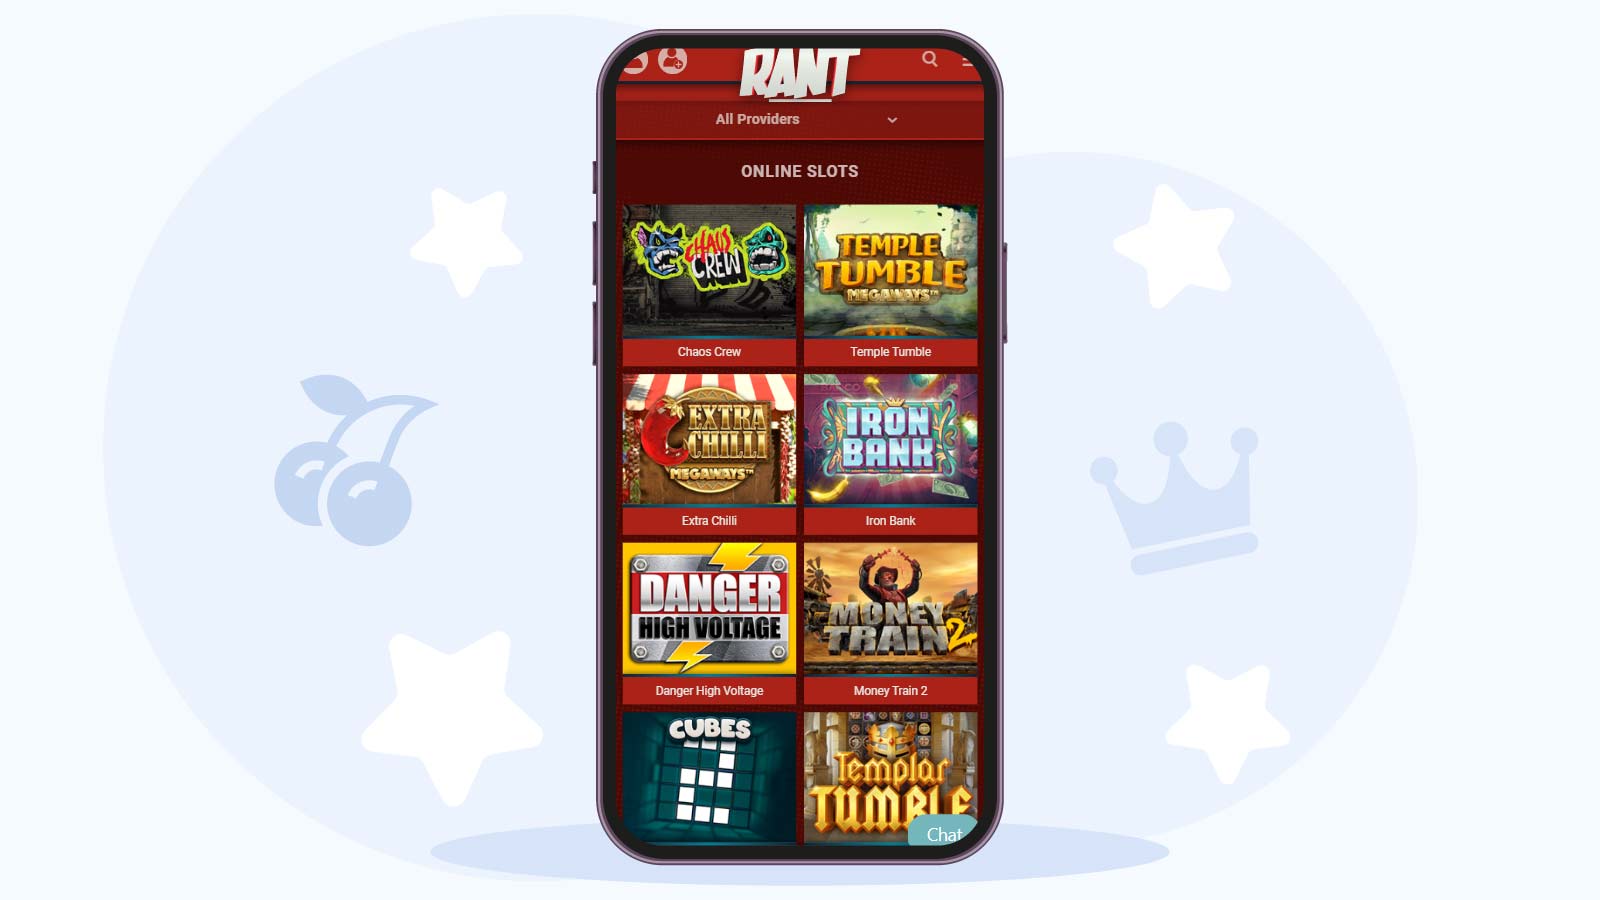 Best-Gammix-Casino-for-Mobile-Play-Rant-Casino